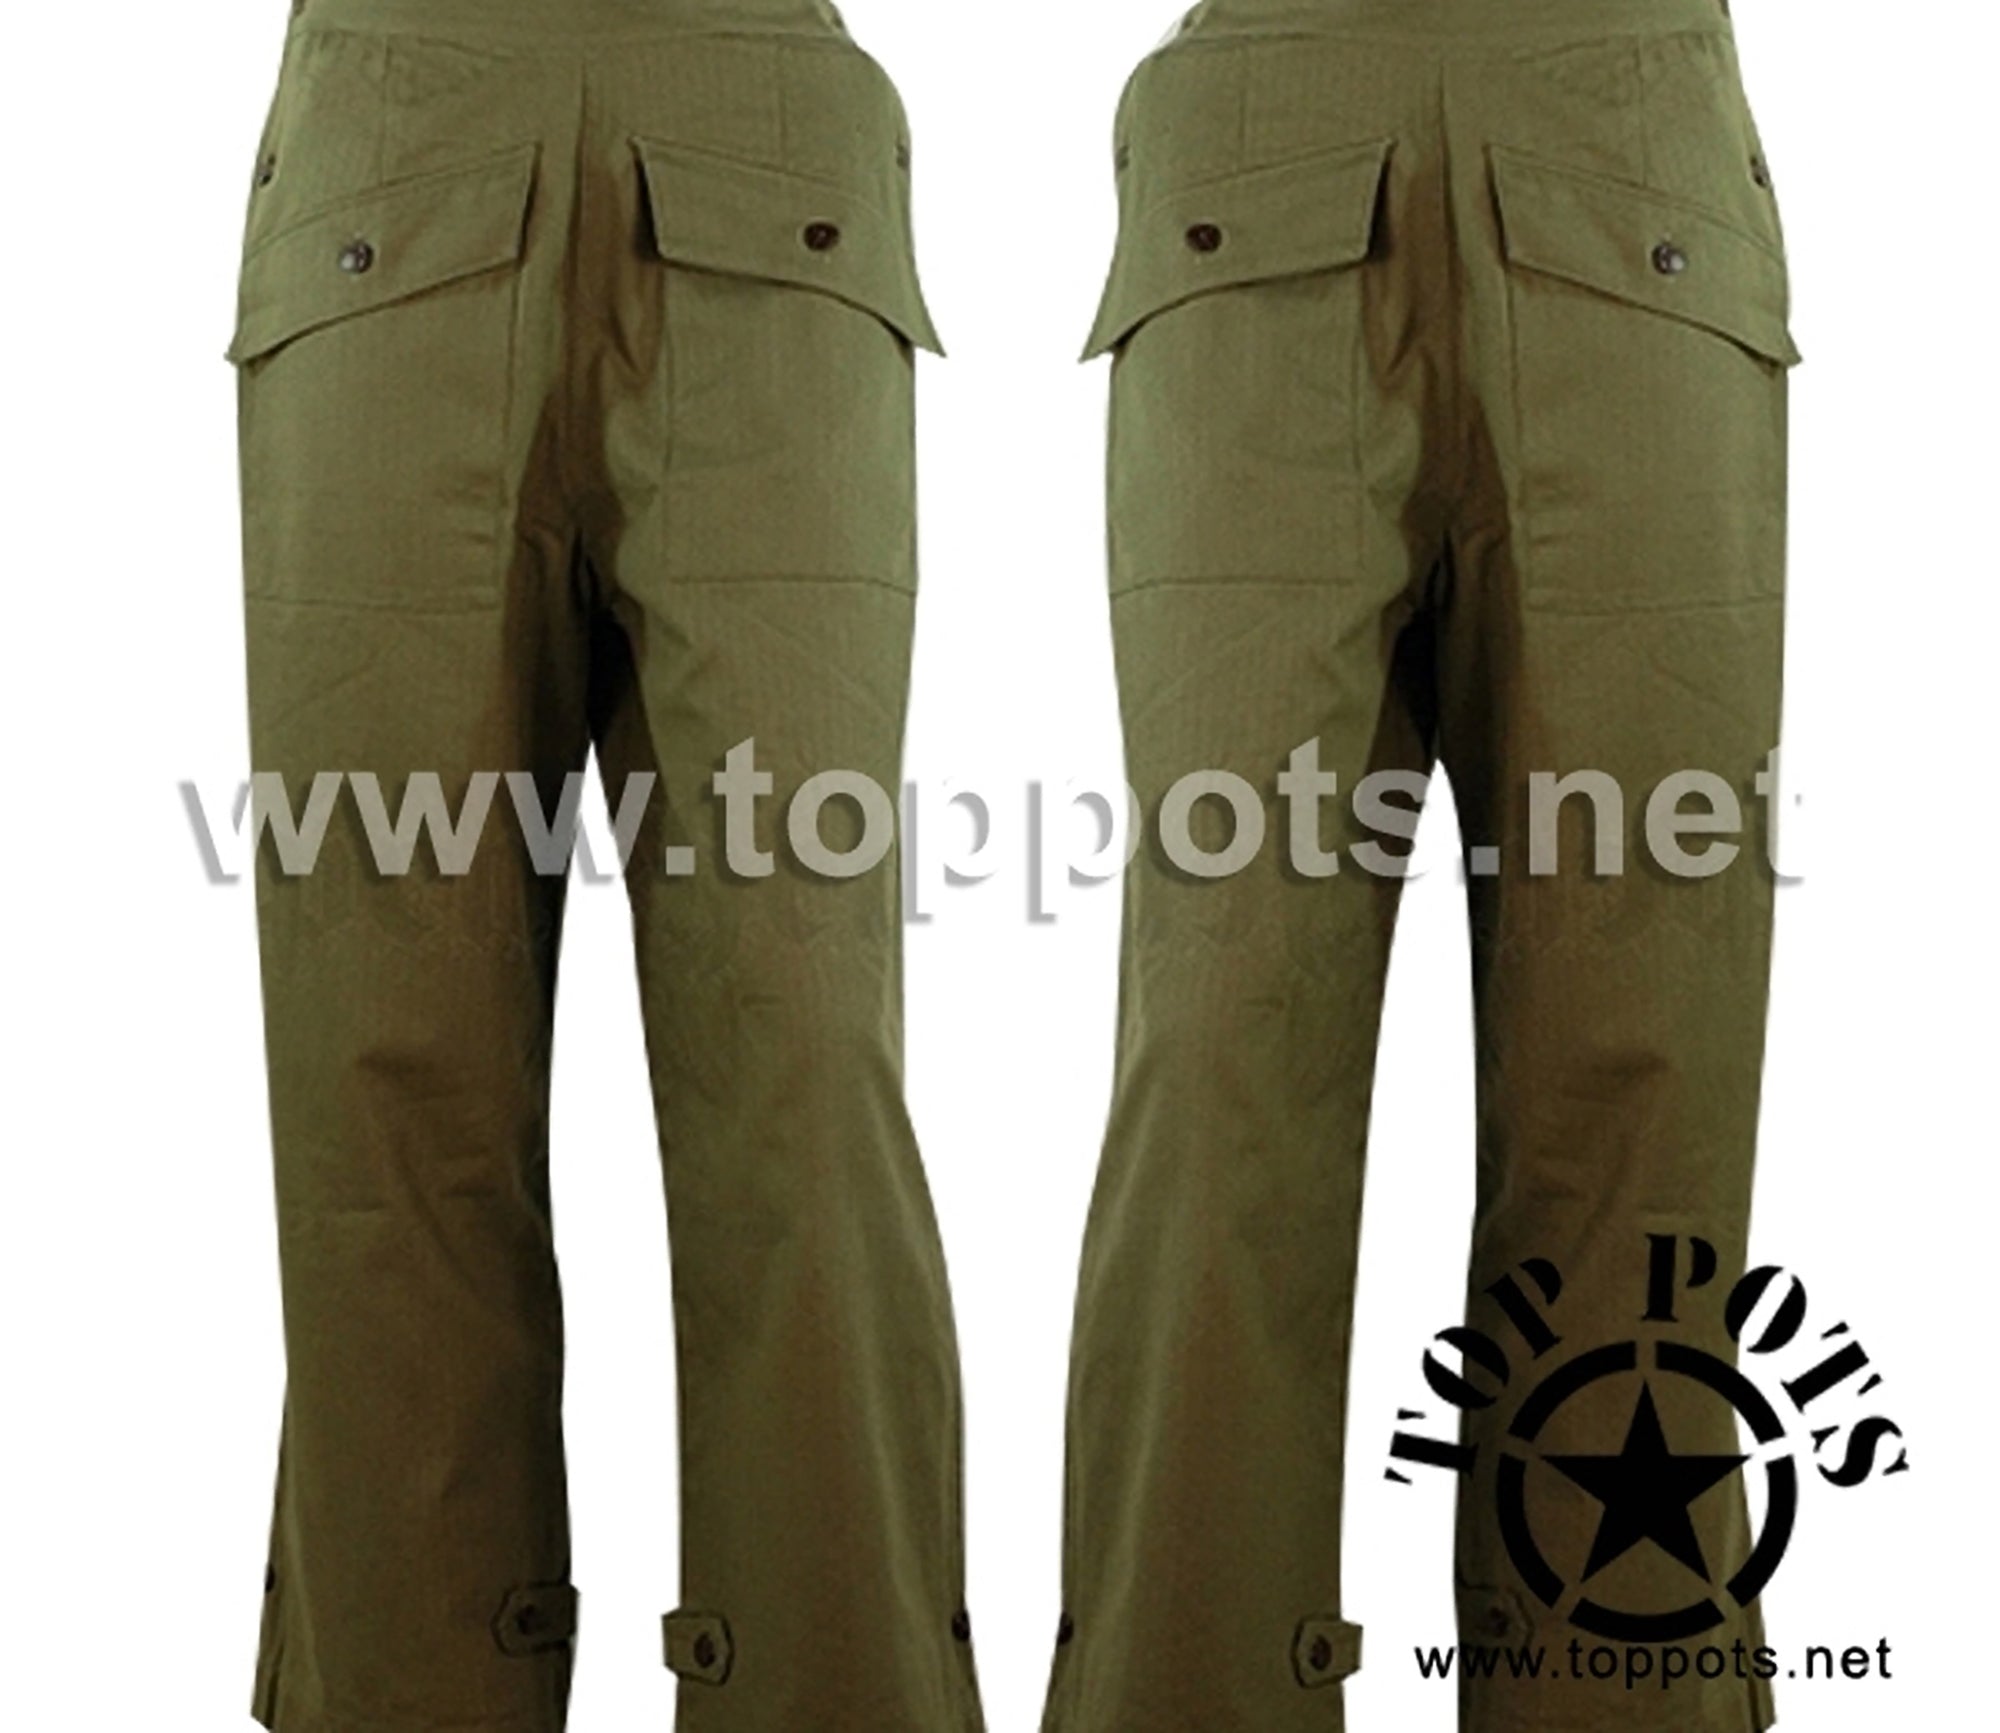 WWII US Army Reproduction M1943 Cotton Olive Drab WAC HBT Uniform Field Trousers – Fatigue Pants